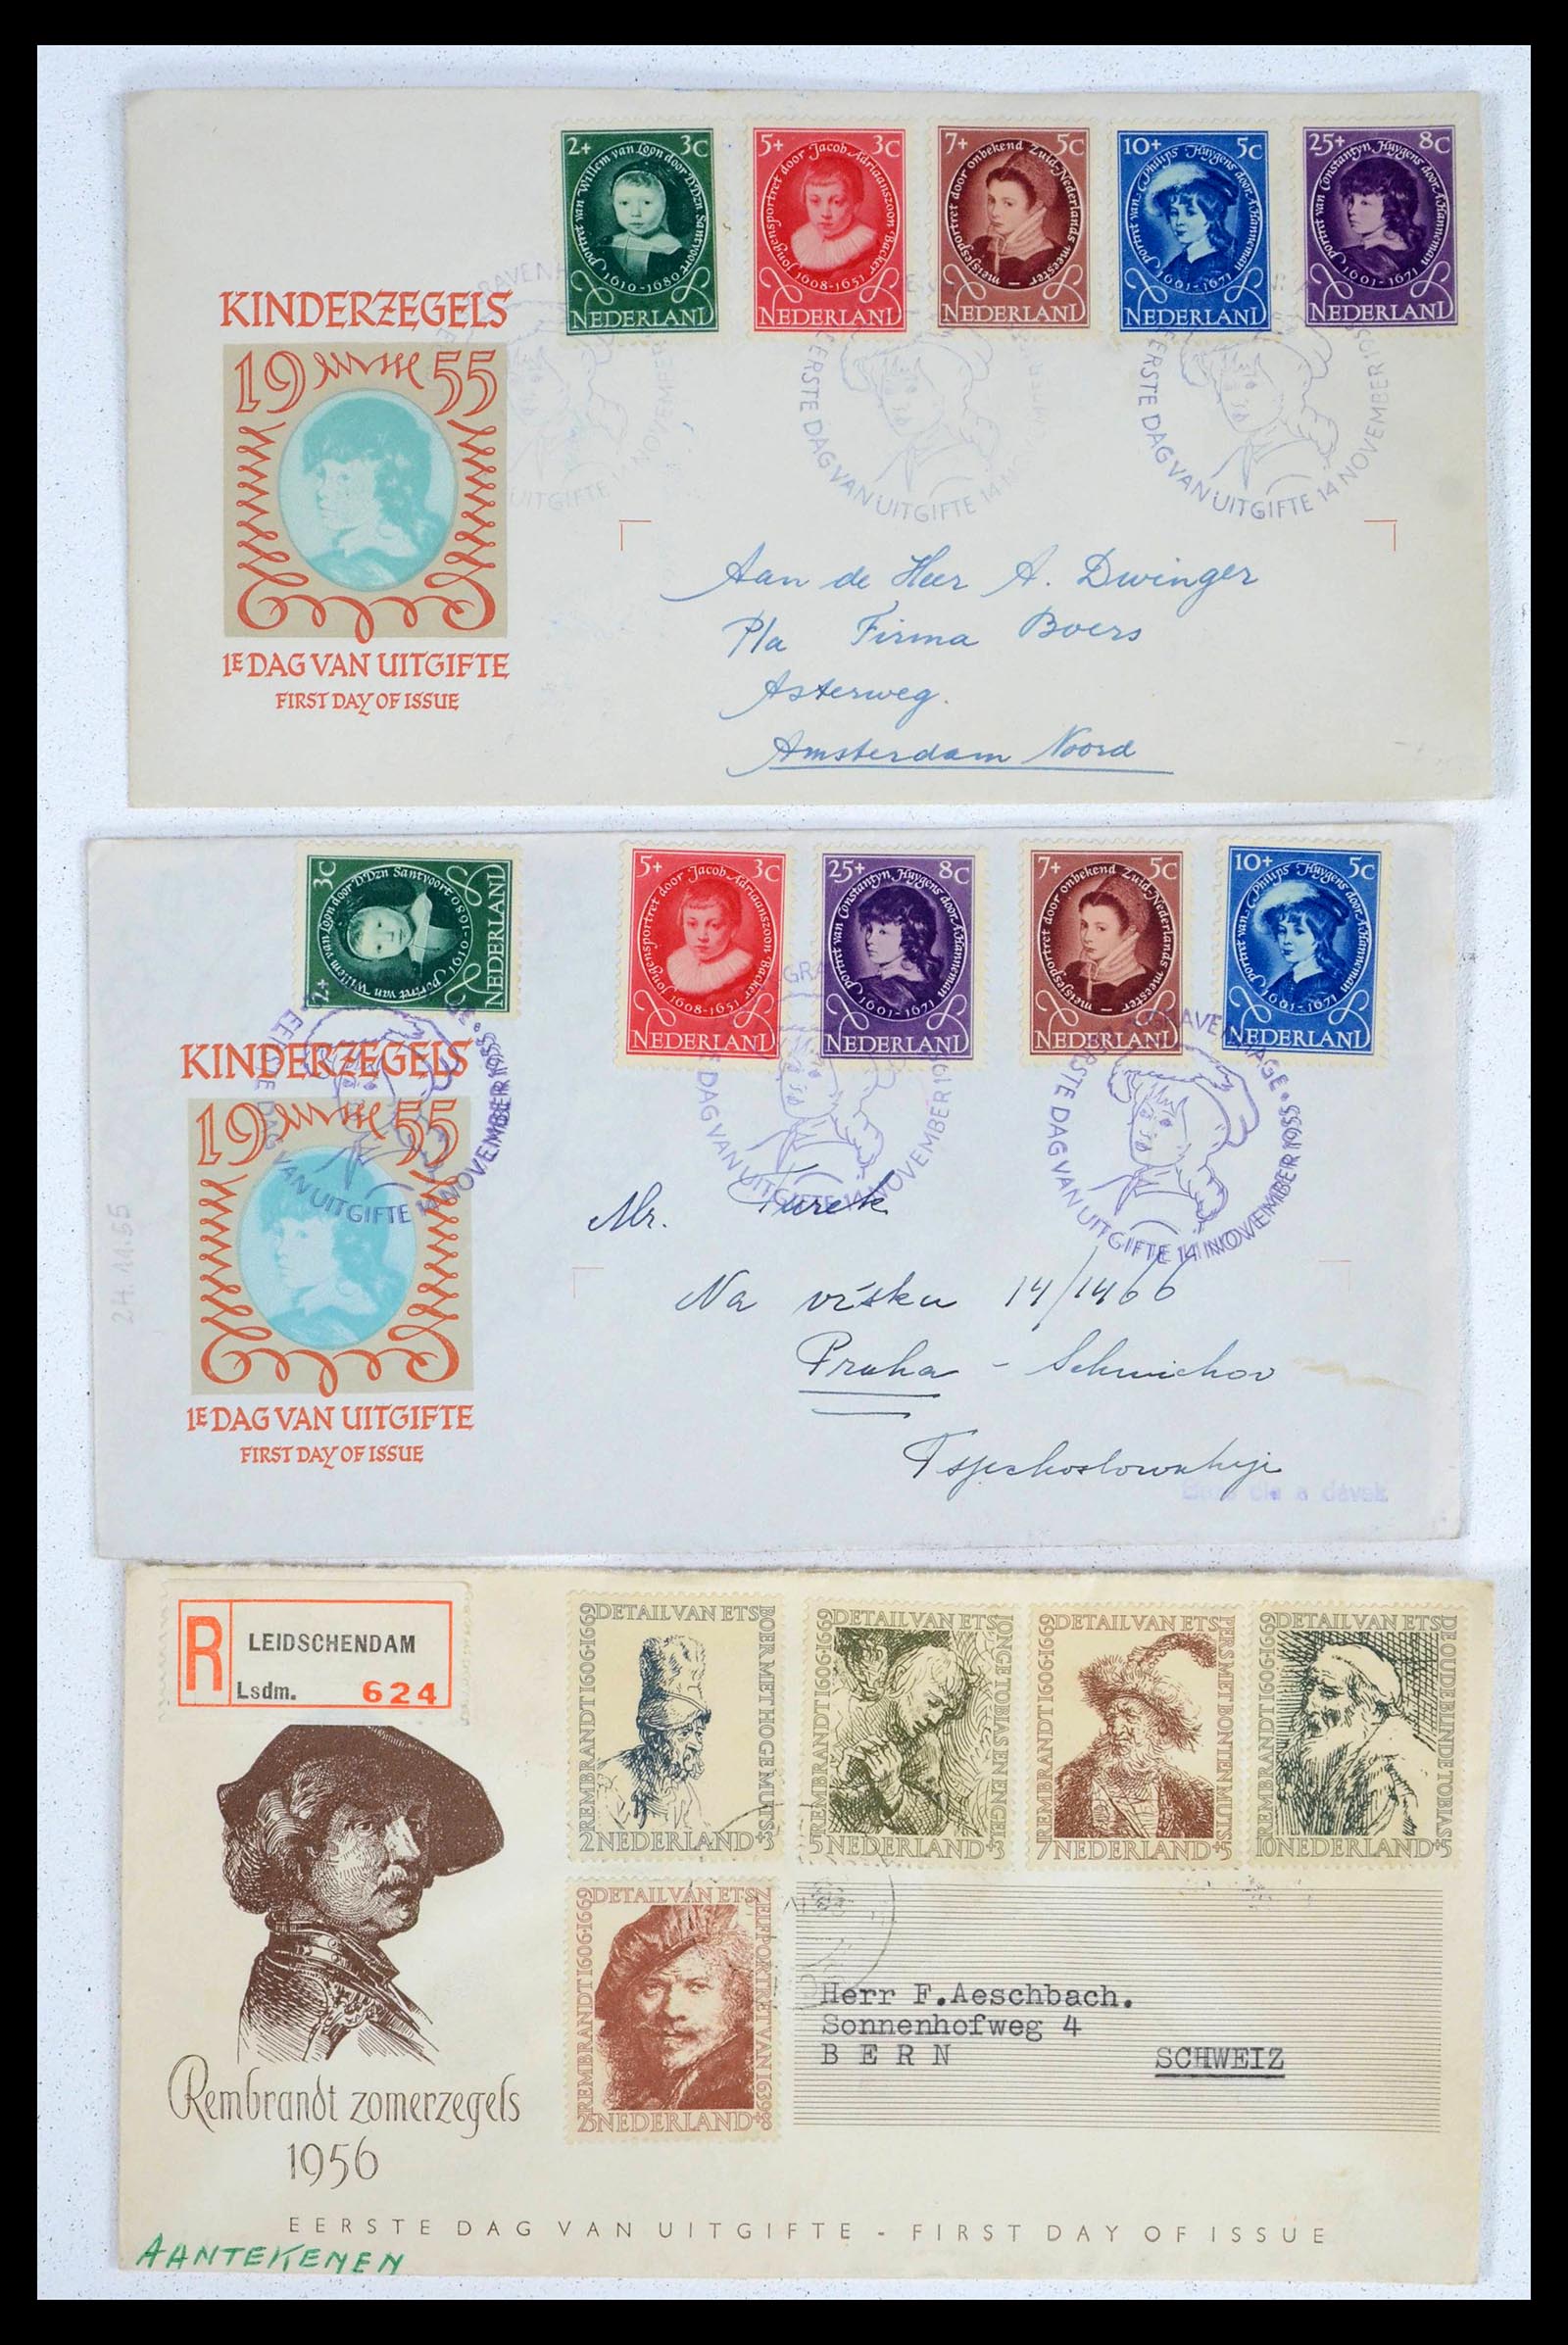 39474 0012 - Stamp collection 39474 Netherlands FDC's 1950-1960.